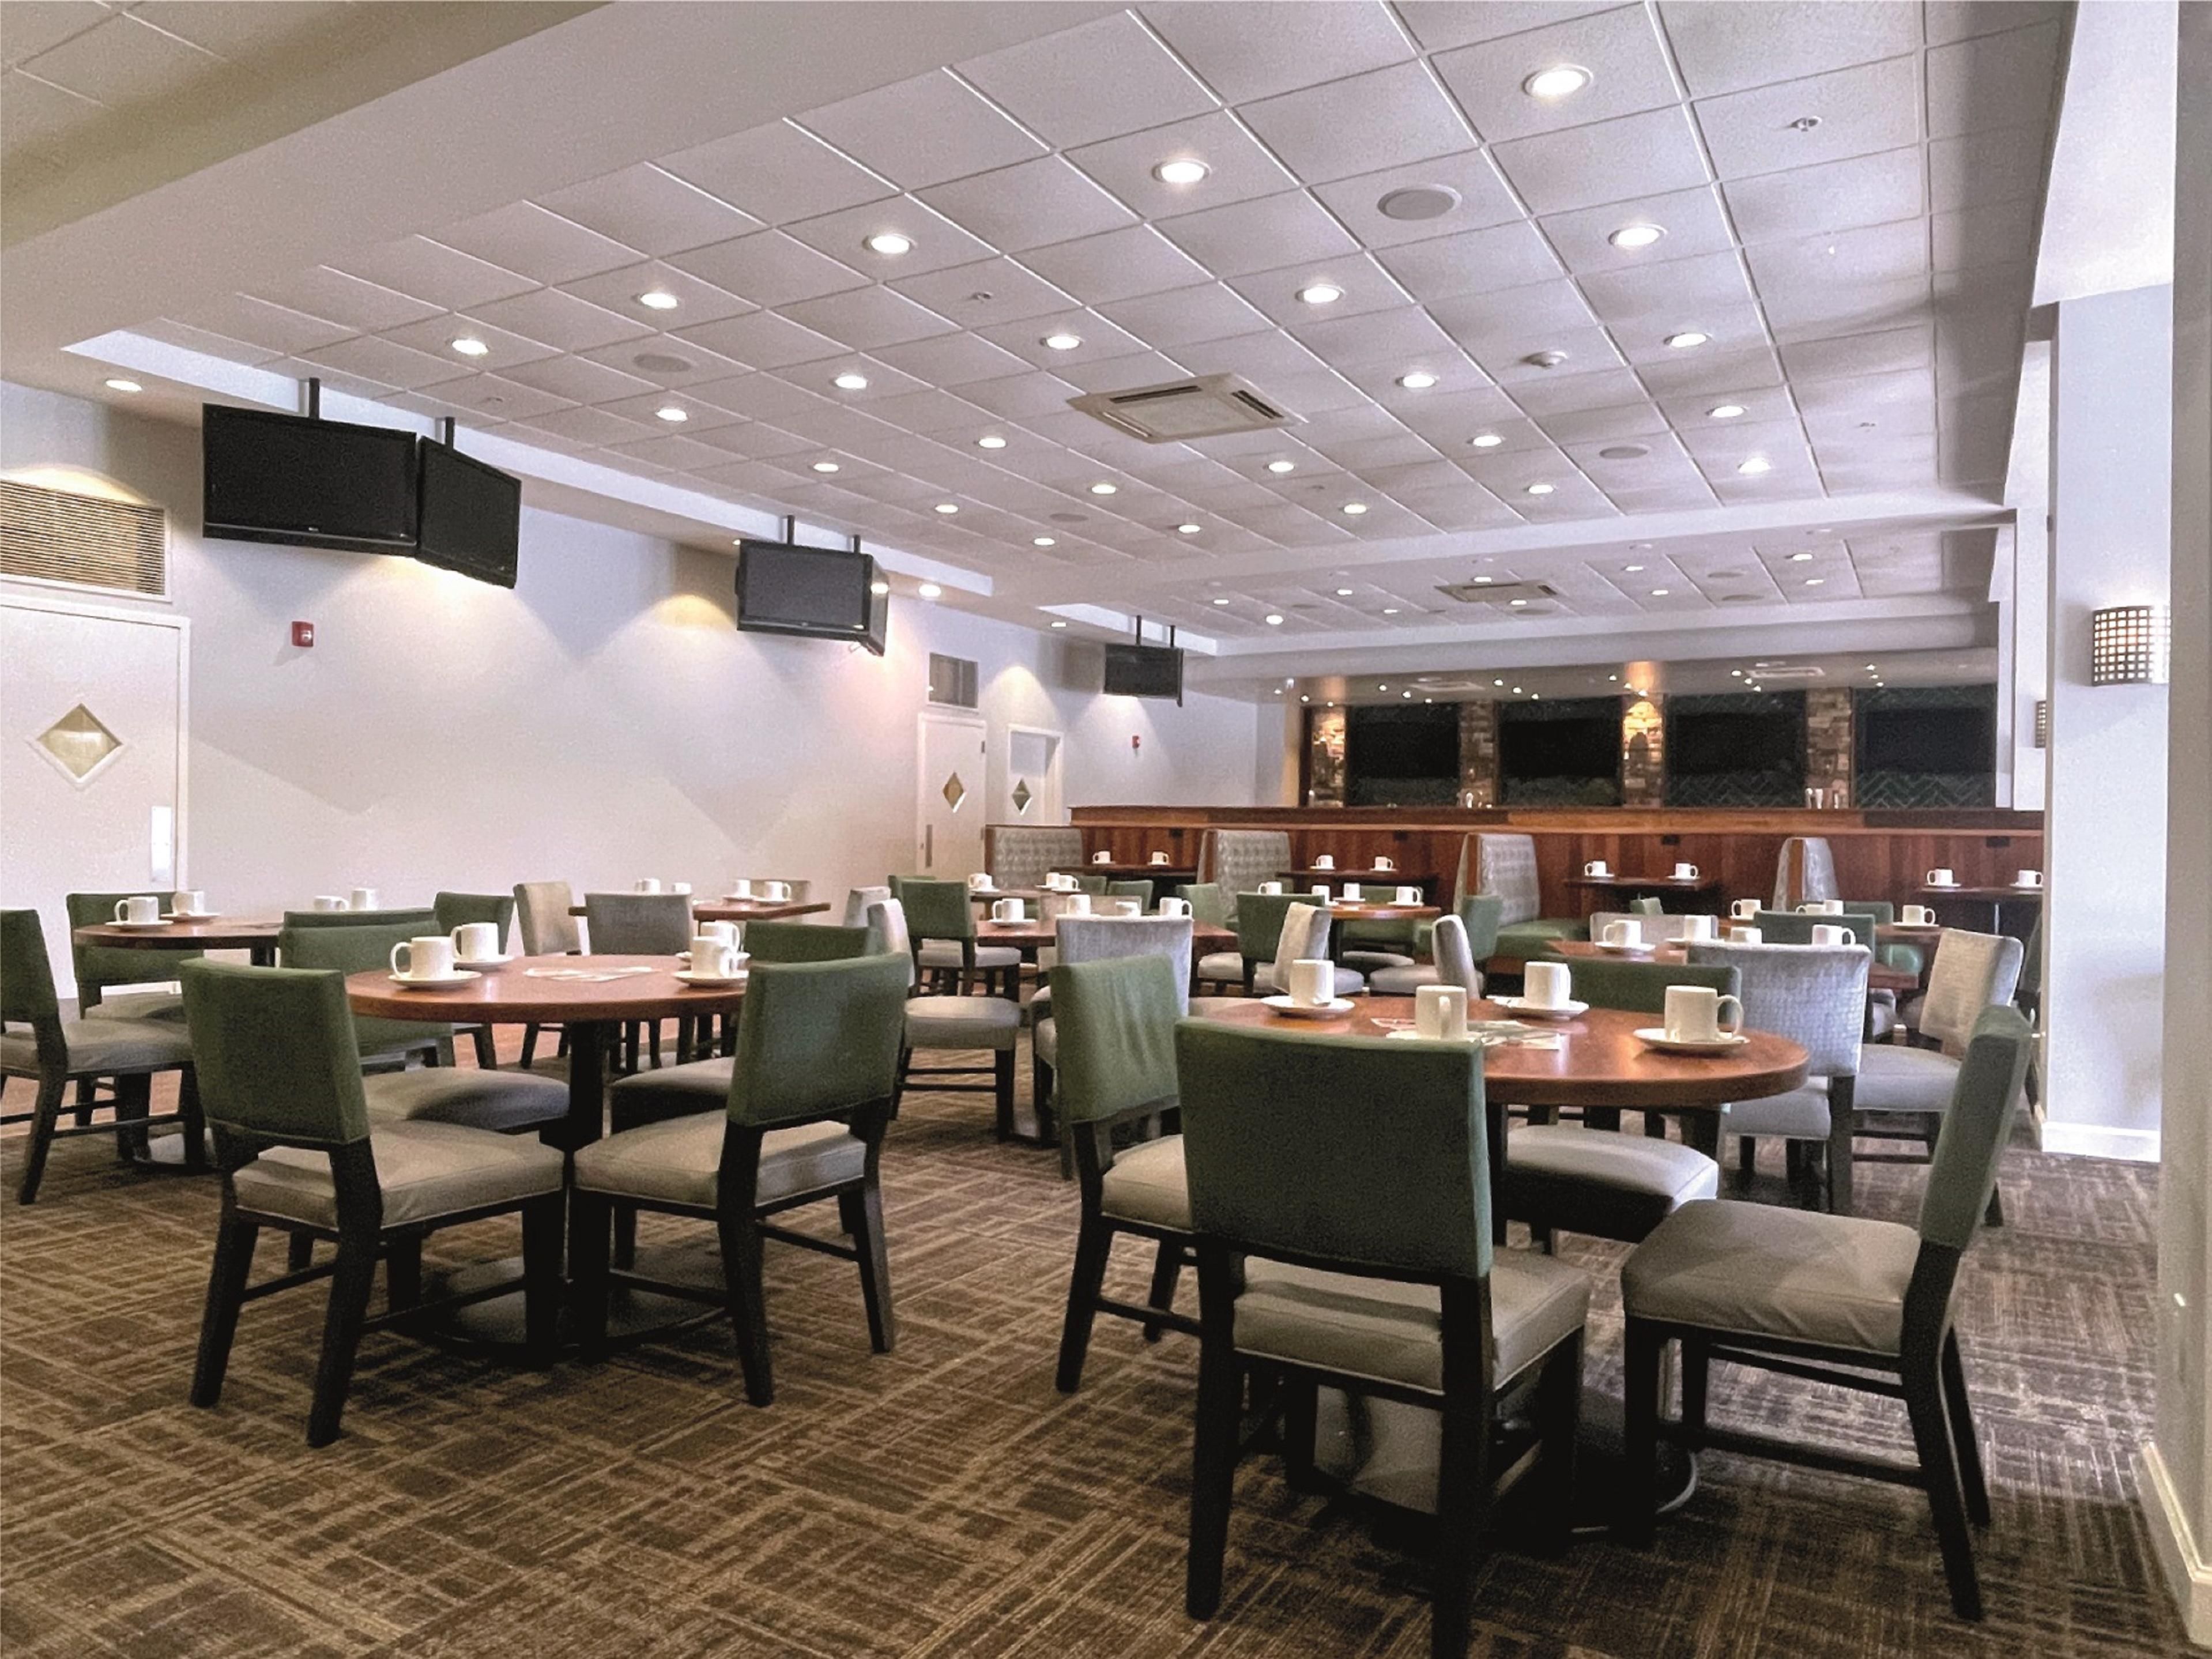 Get in the zone at the Holiday Inn!  The Sport Zone, a pub and grill connected to the hotel is perfect for that convenient meal.  Surrounded by over 25 flat-screen TVs, you are guaranteed a great seat to cheer on your favorite team while keeping an eye on your rivals. 